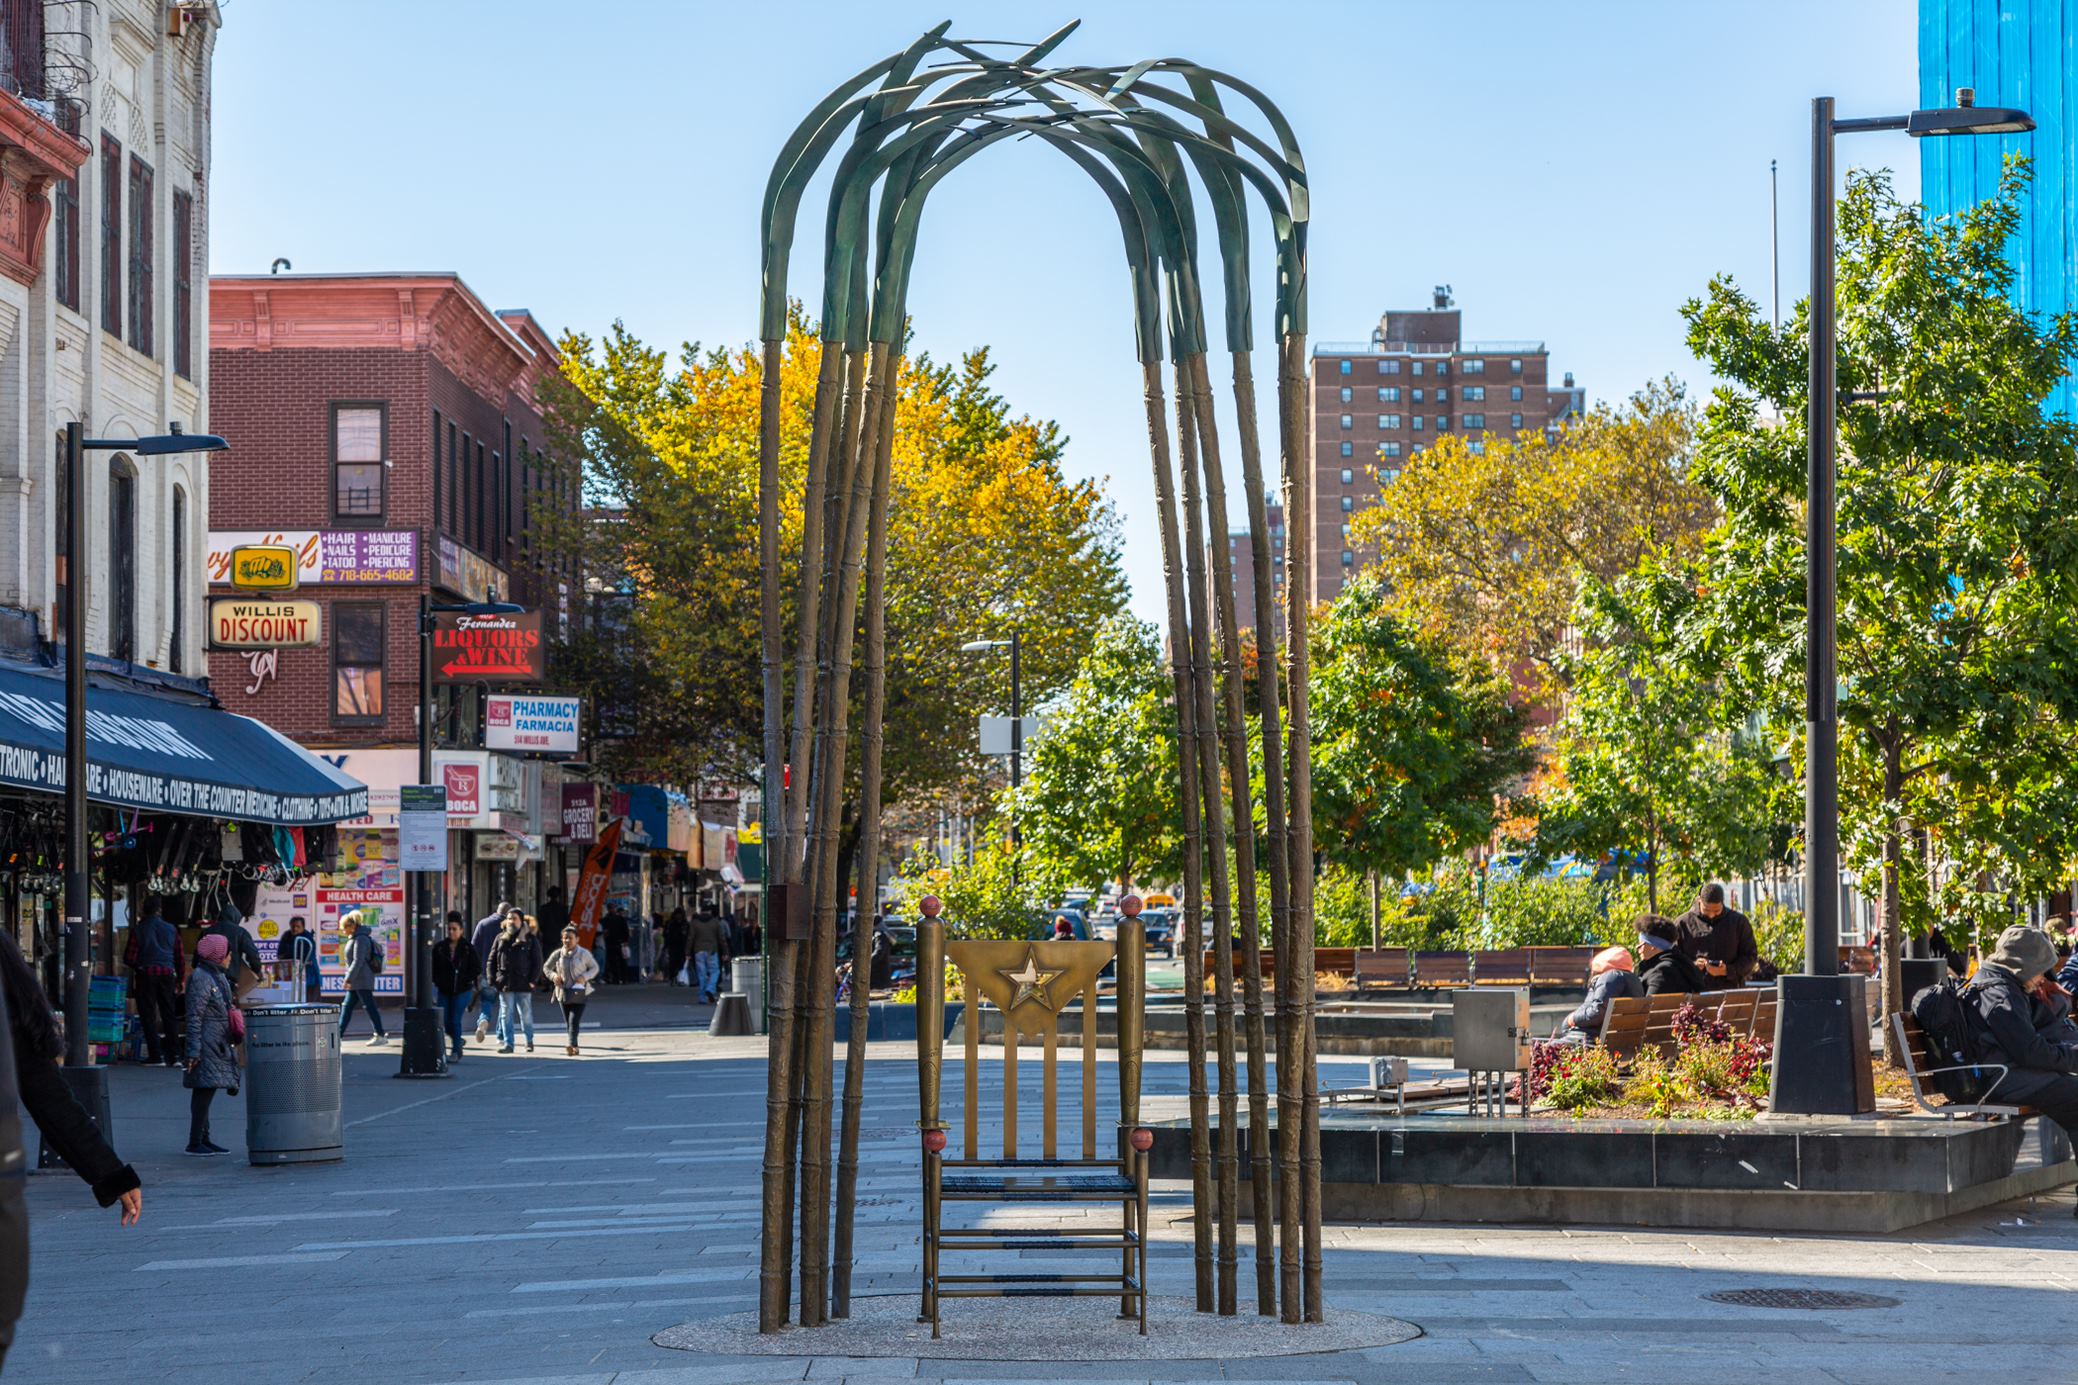 the installation stands at Roberto Clemente Plaza in the Bronx